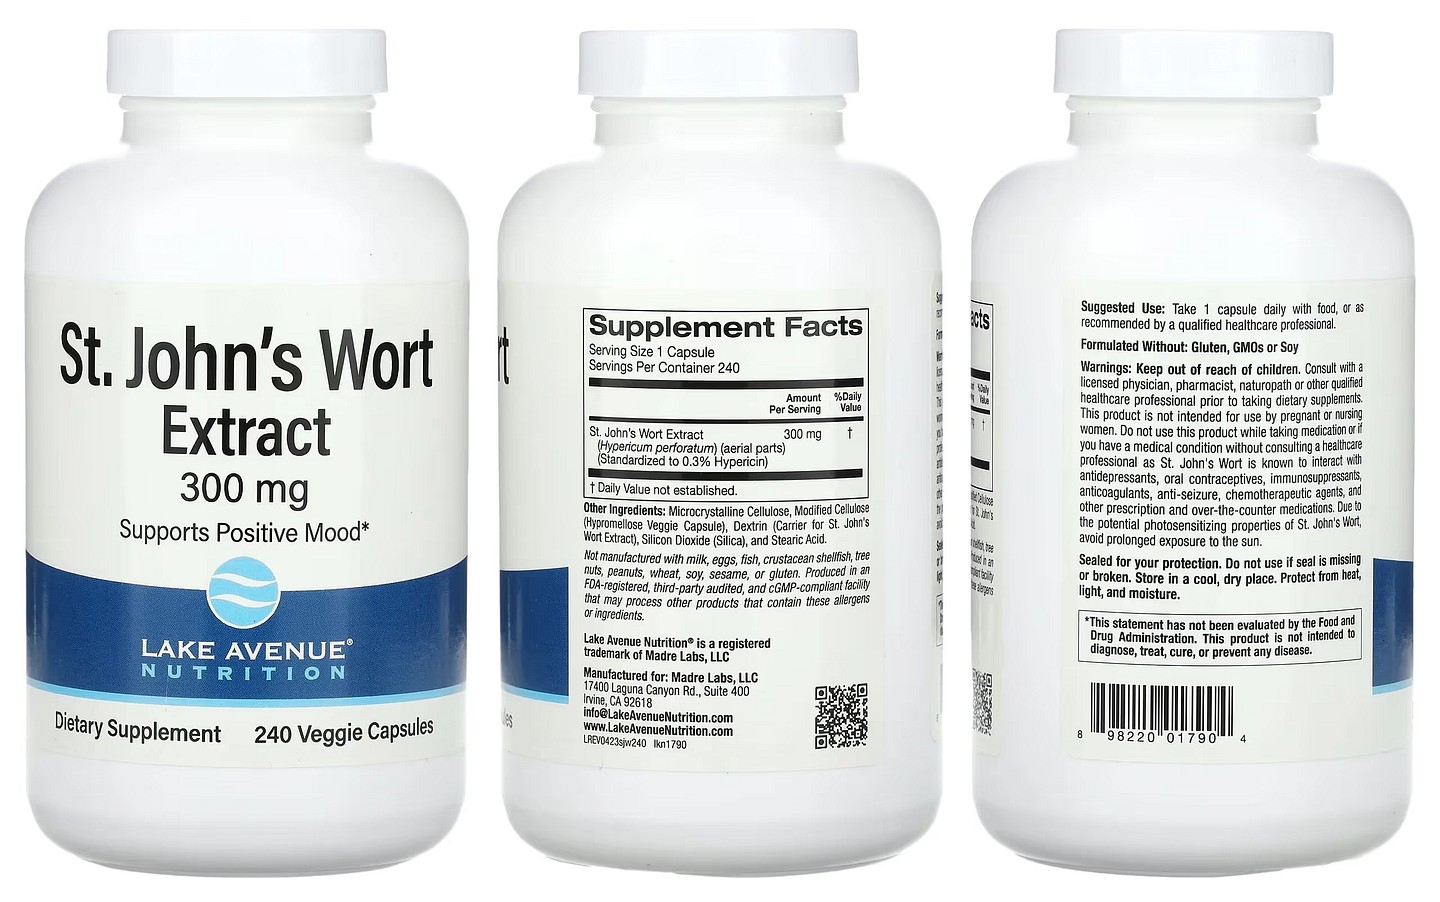 Lake Avenue Nutrition, St. John's Wort Extract packaging